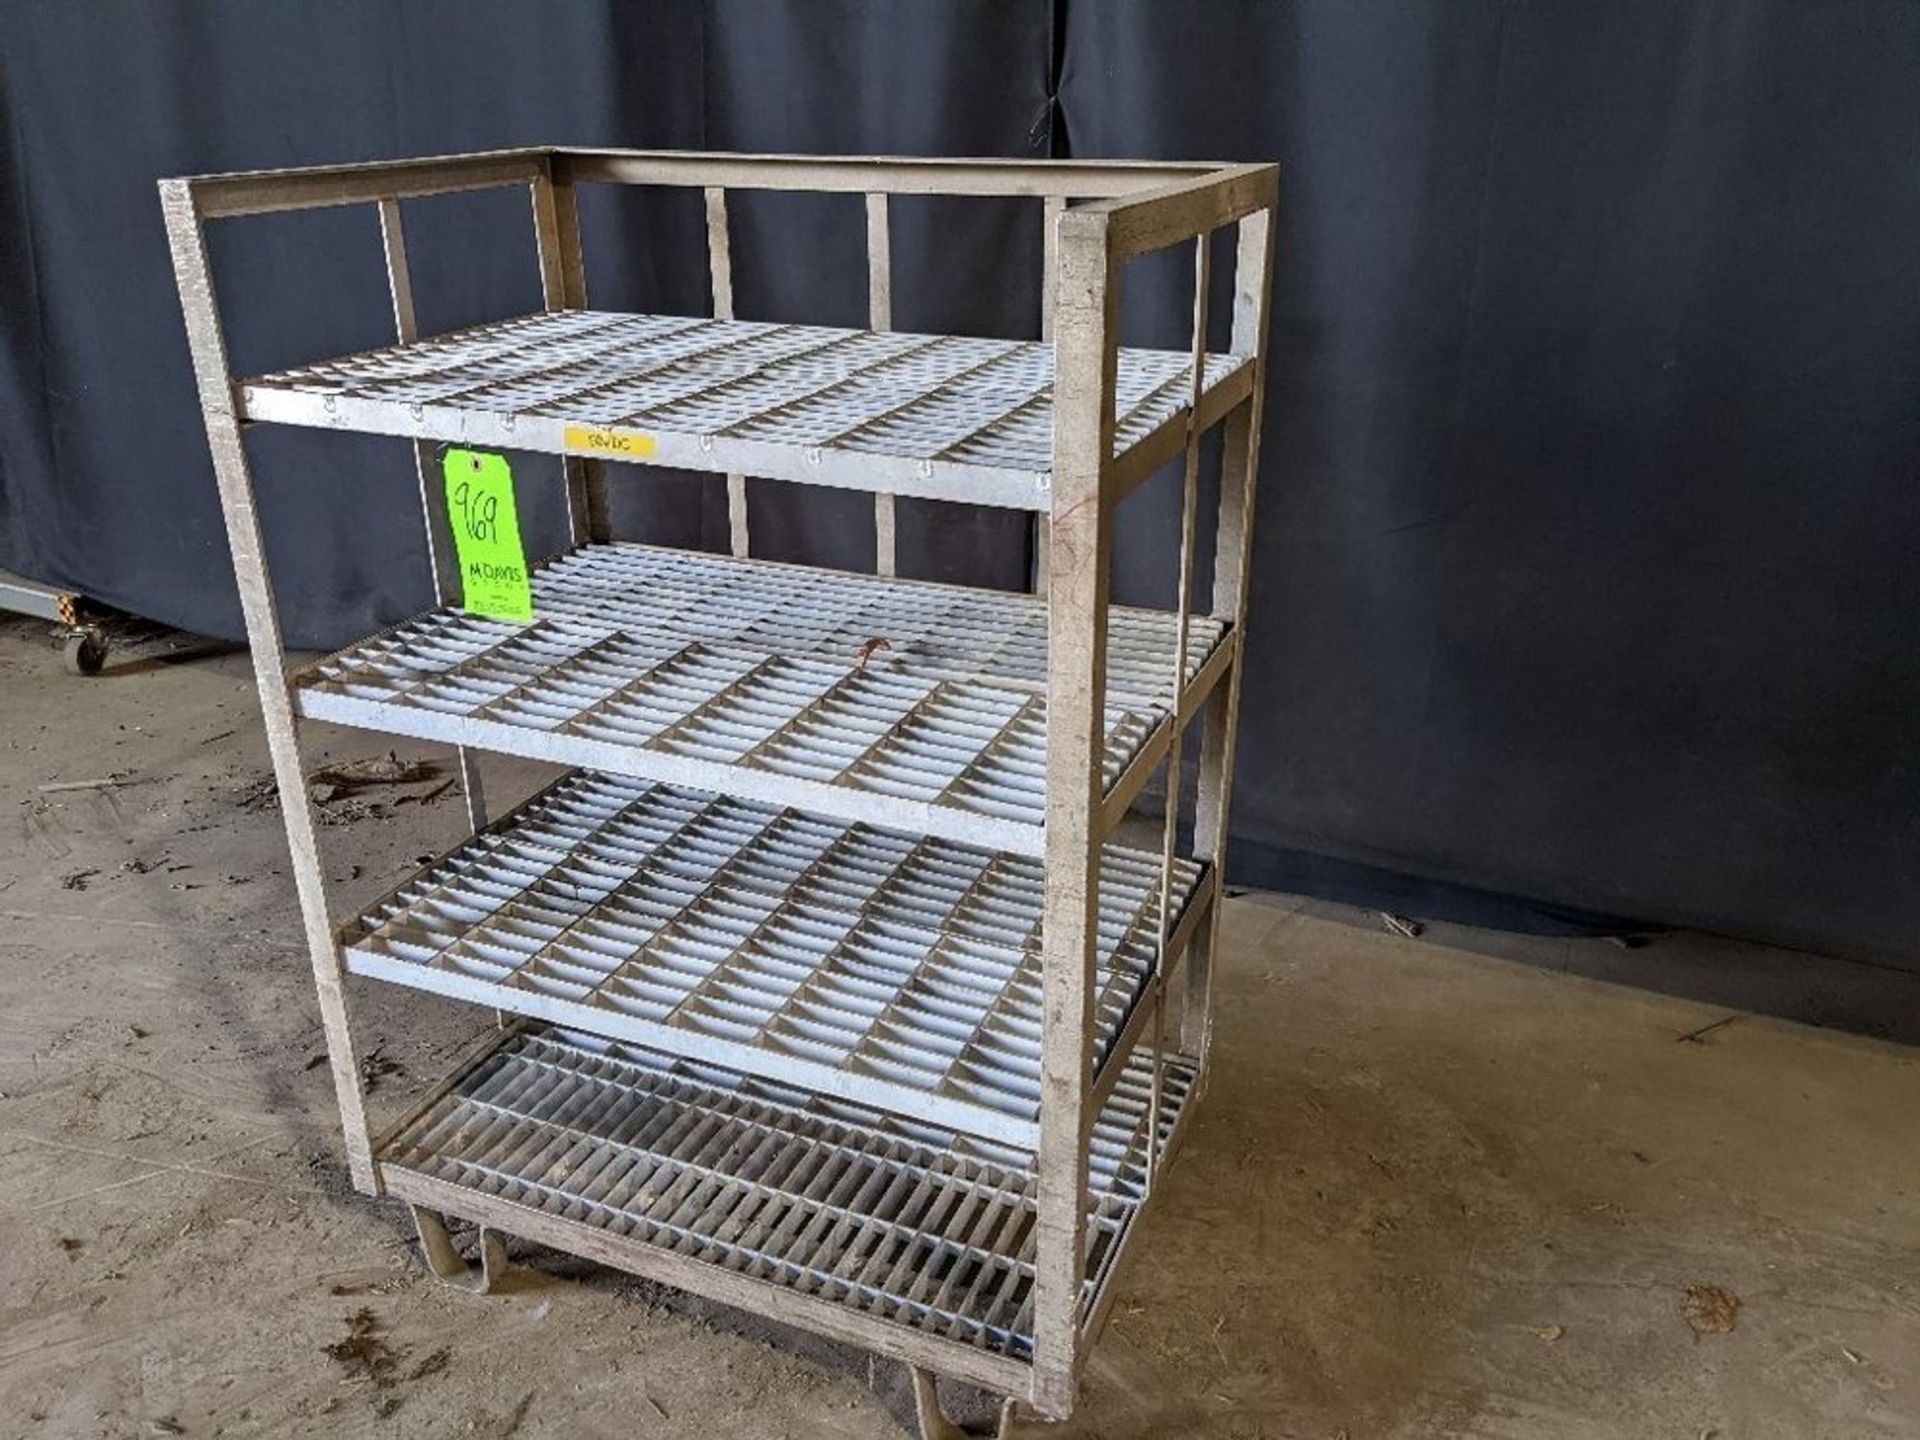 Qty (1) Metal Rack - 36"L x 24"W x 51"H, Model N/A, S/N N/A - Image 2 of 3